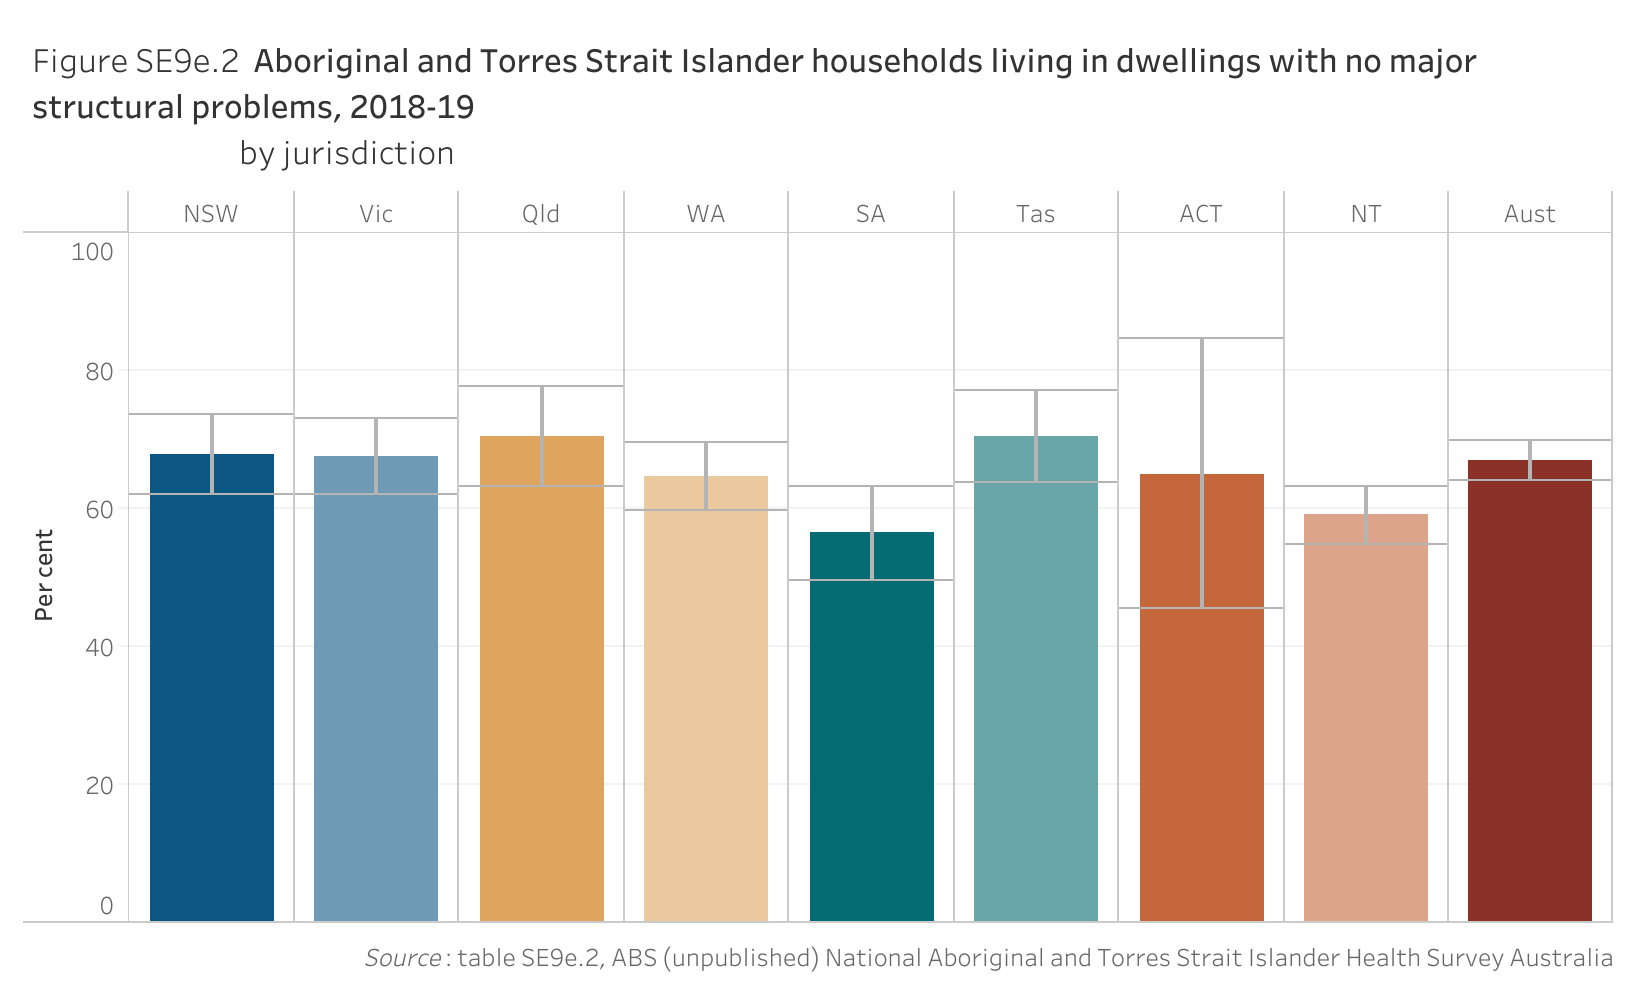 Figure SE9e.2 shows Aboriginal and Torres Strait Islander households living in dwellings with no major structural problems, 2018-19, by jurisdiction. More details can be found within the text near this image.